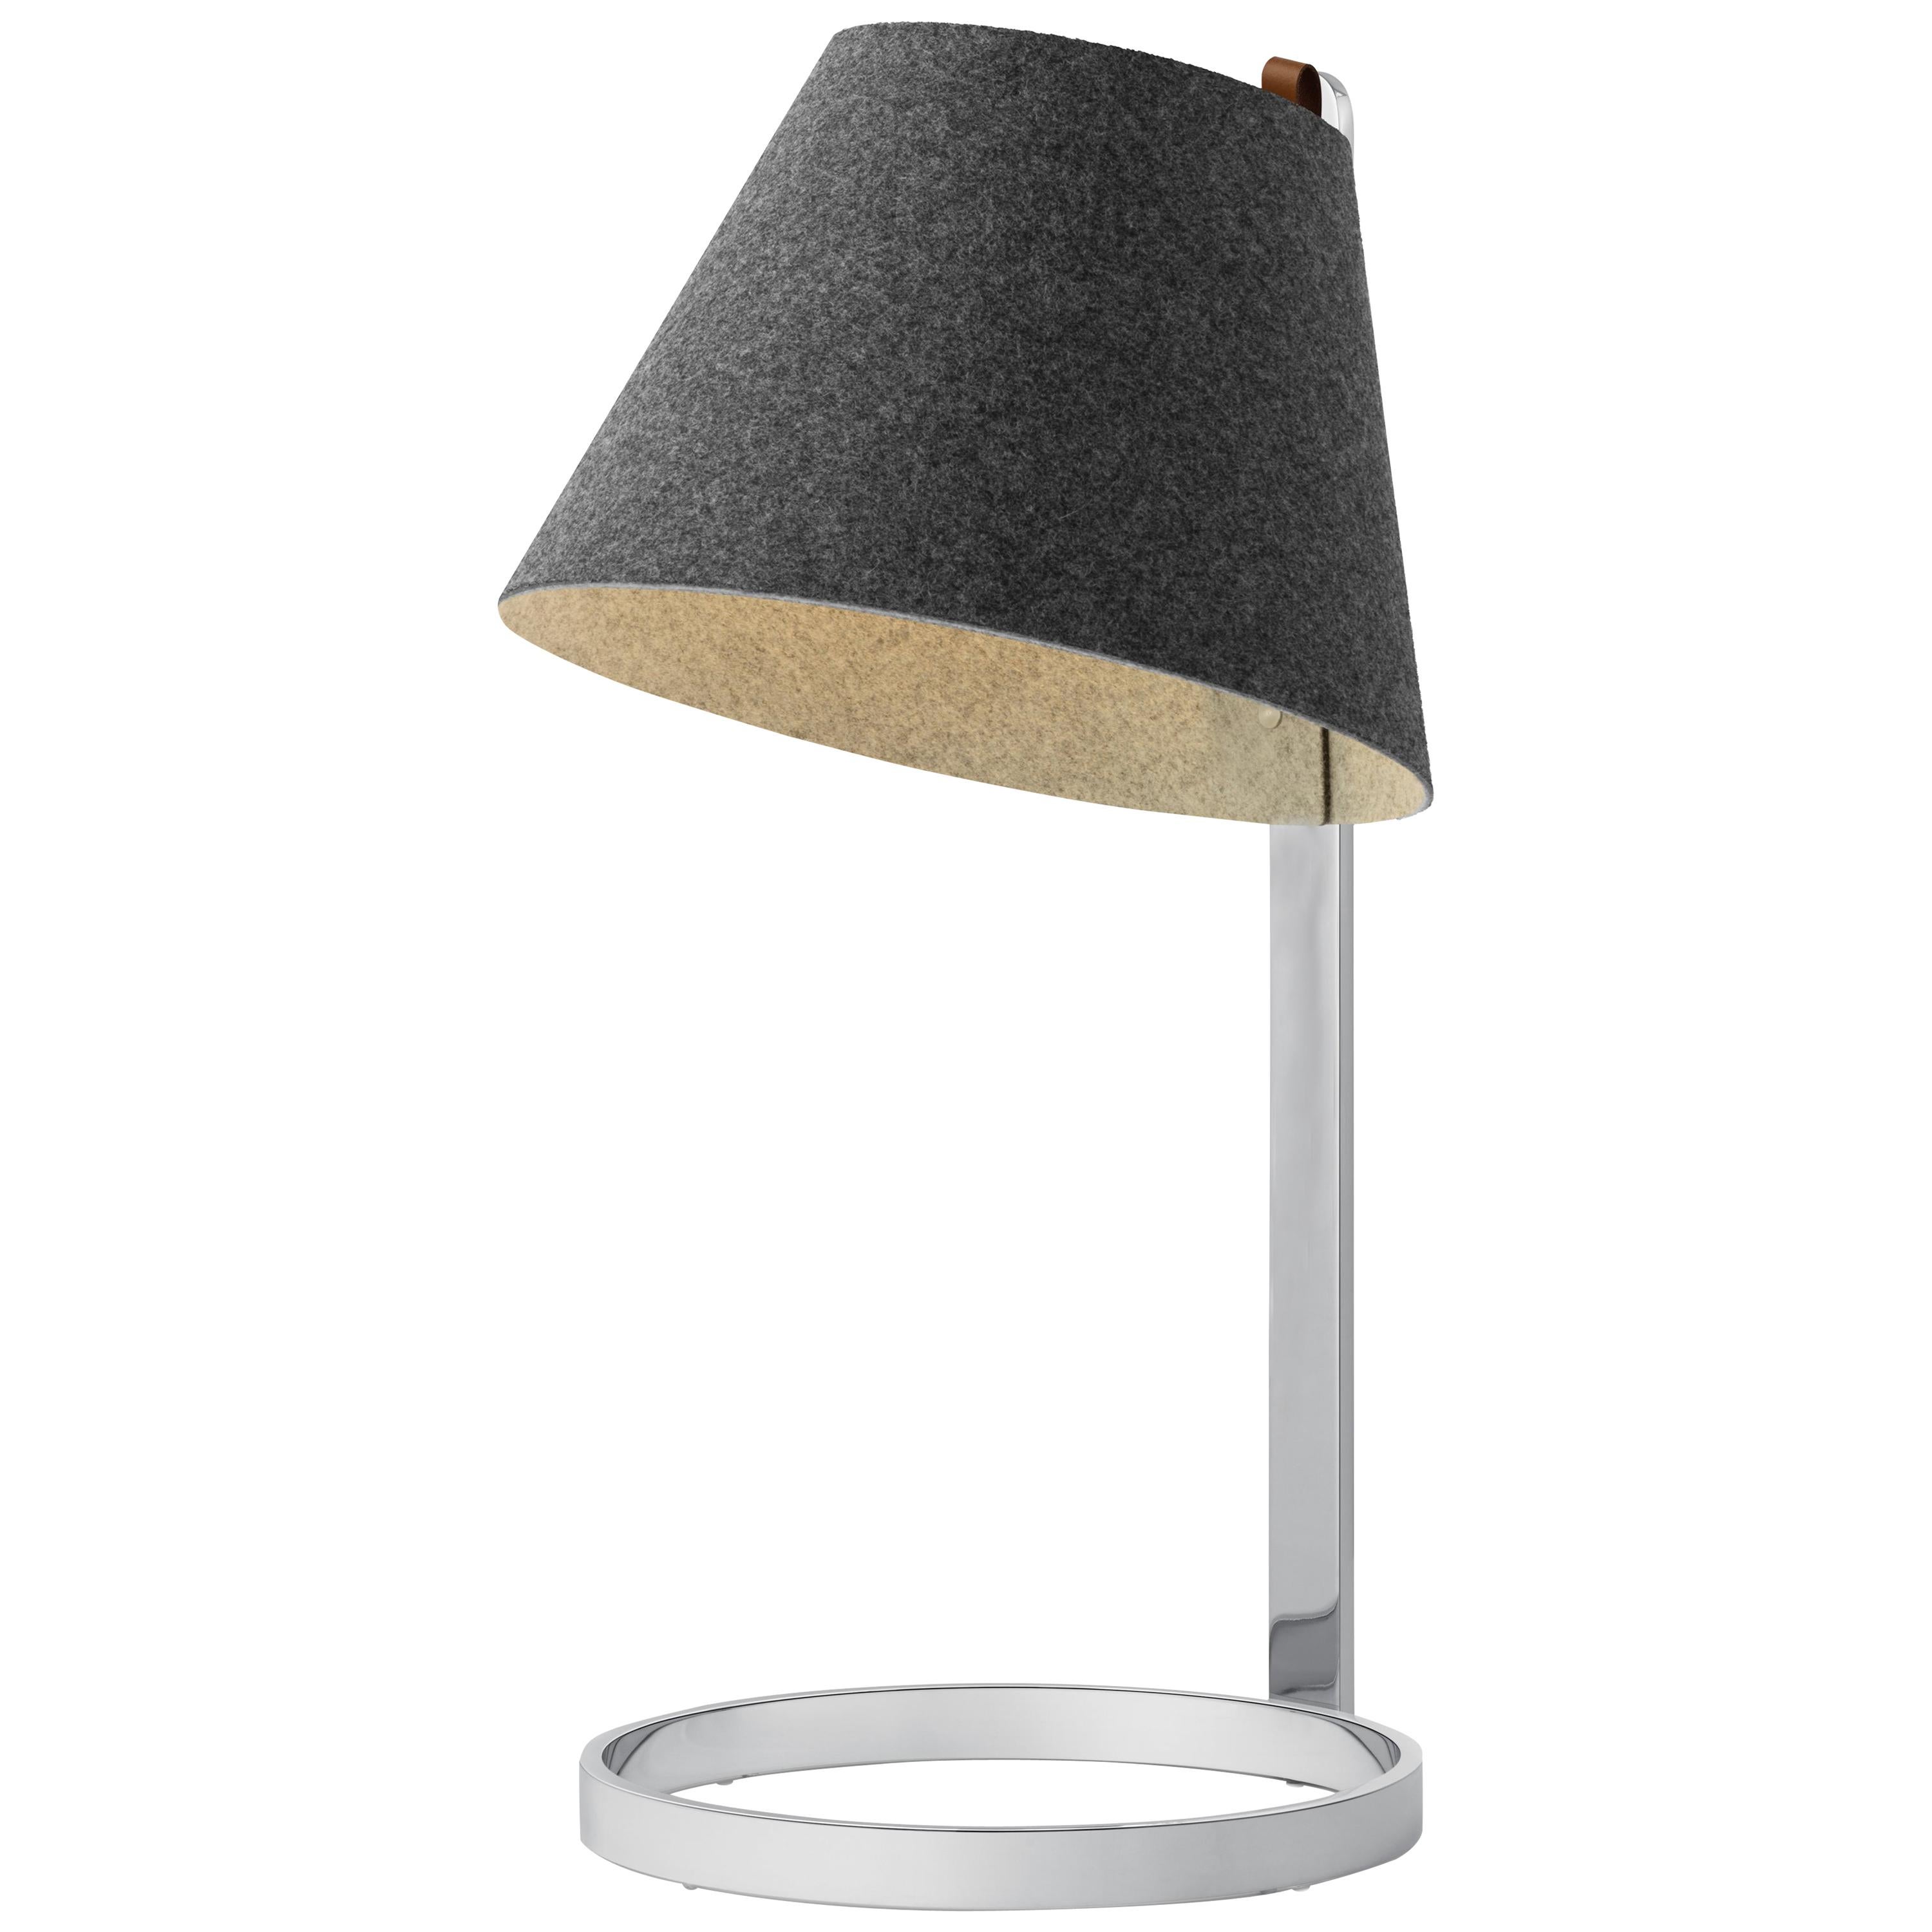 Lana Large Table Lamp in Charcoal and Grey with Chrome Base by Pablo Designs